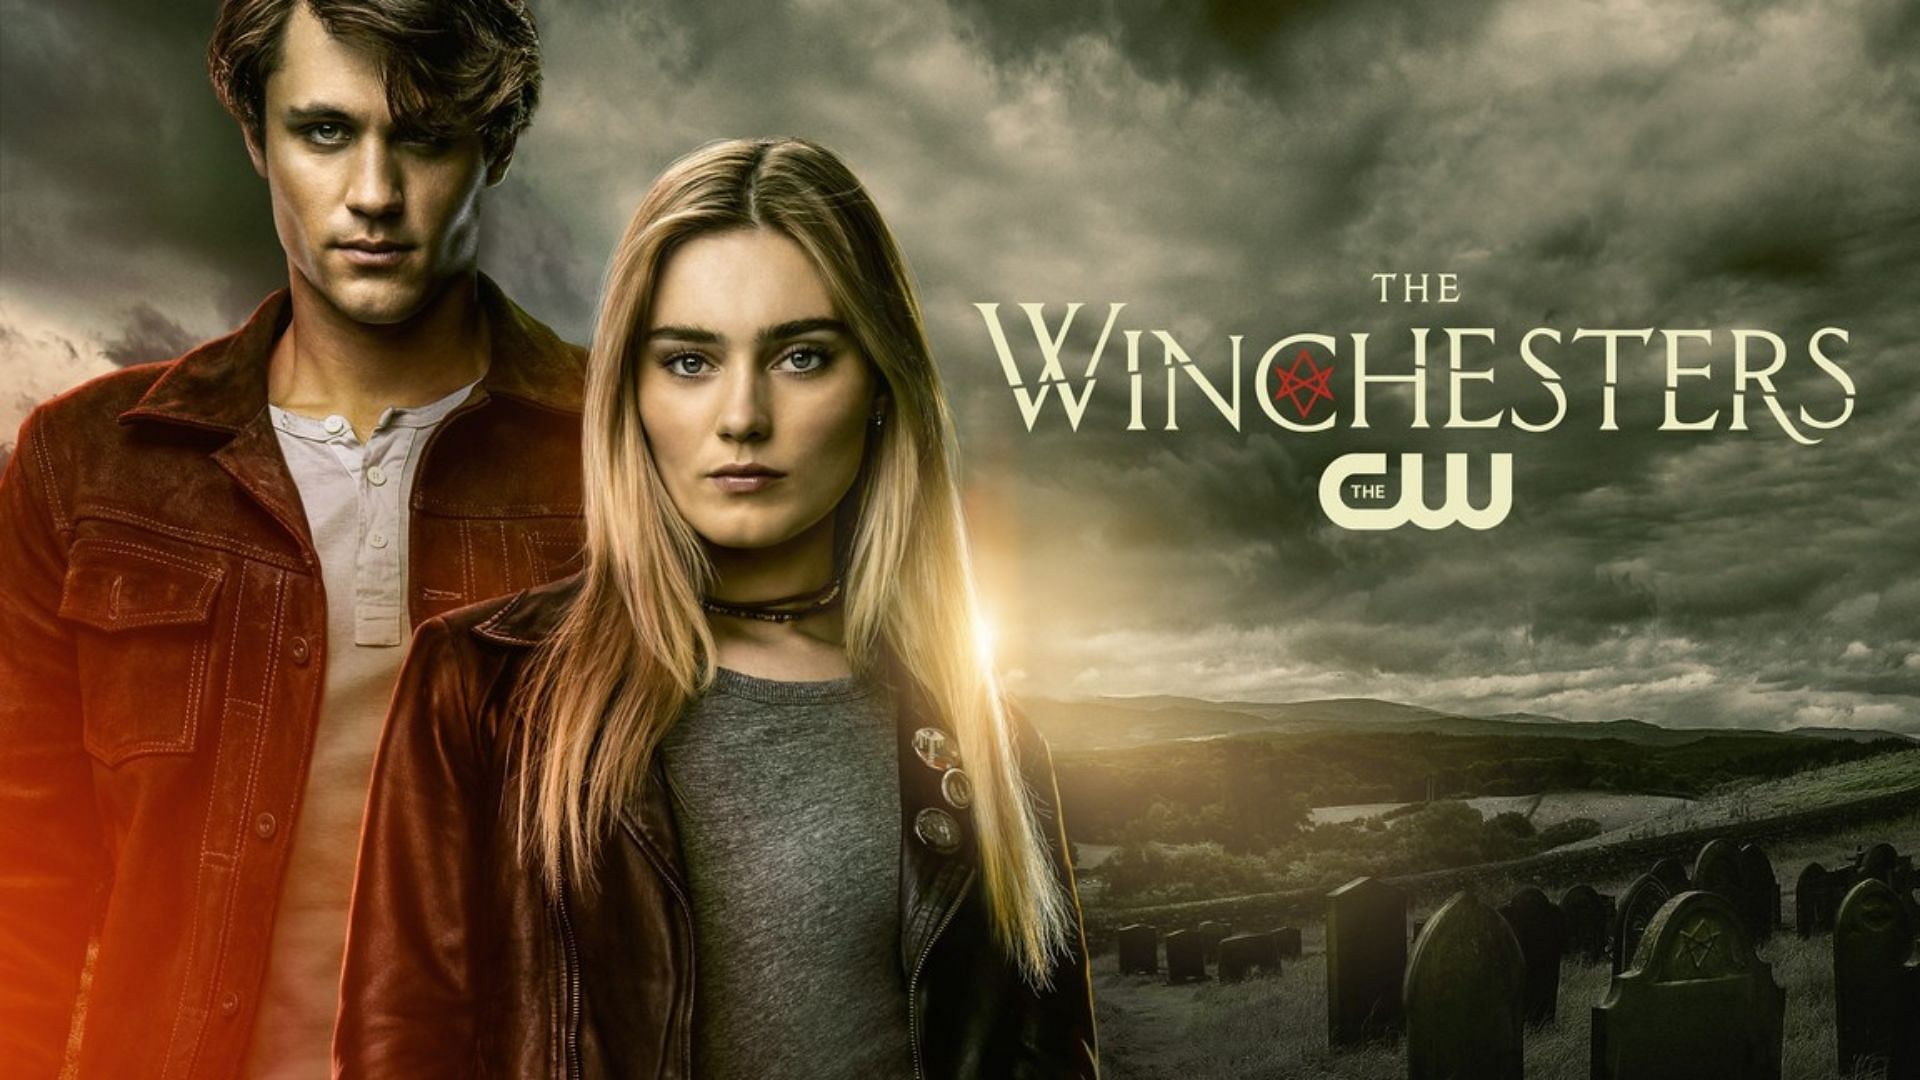 Poster for The Winchesters (Image Via Rotten Tomatoes)